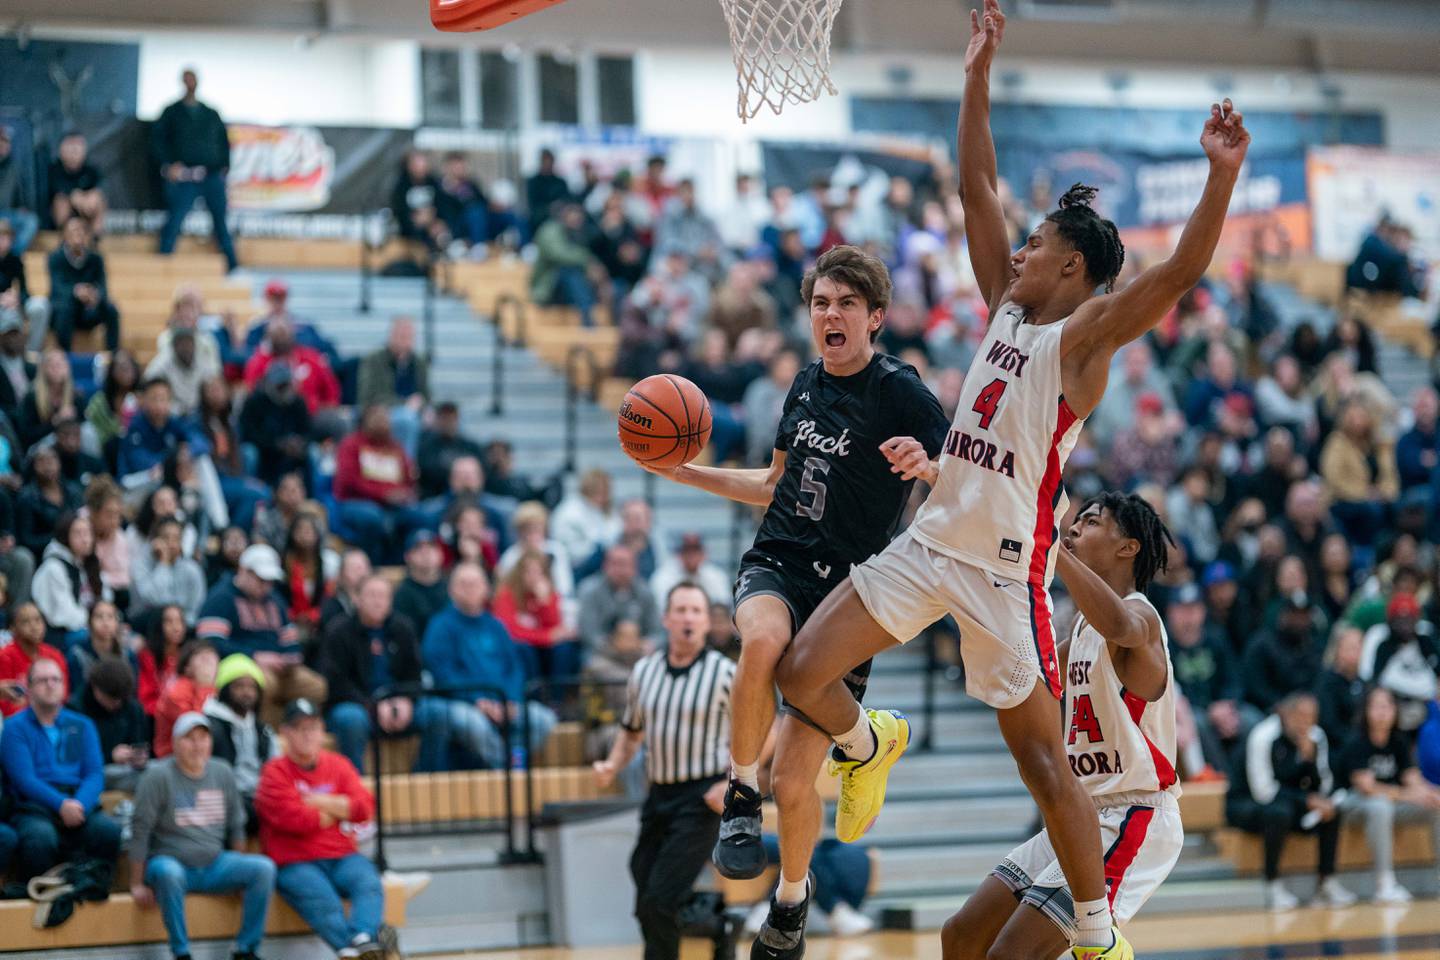 Oswego East's Mason Blanco (5) drives to the basket against West Aurora's Joshua Pickett (4) during the hoops for healing basketball tournament at Oswego High School on Friday, Nov 25, 2022.